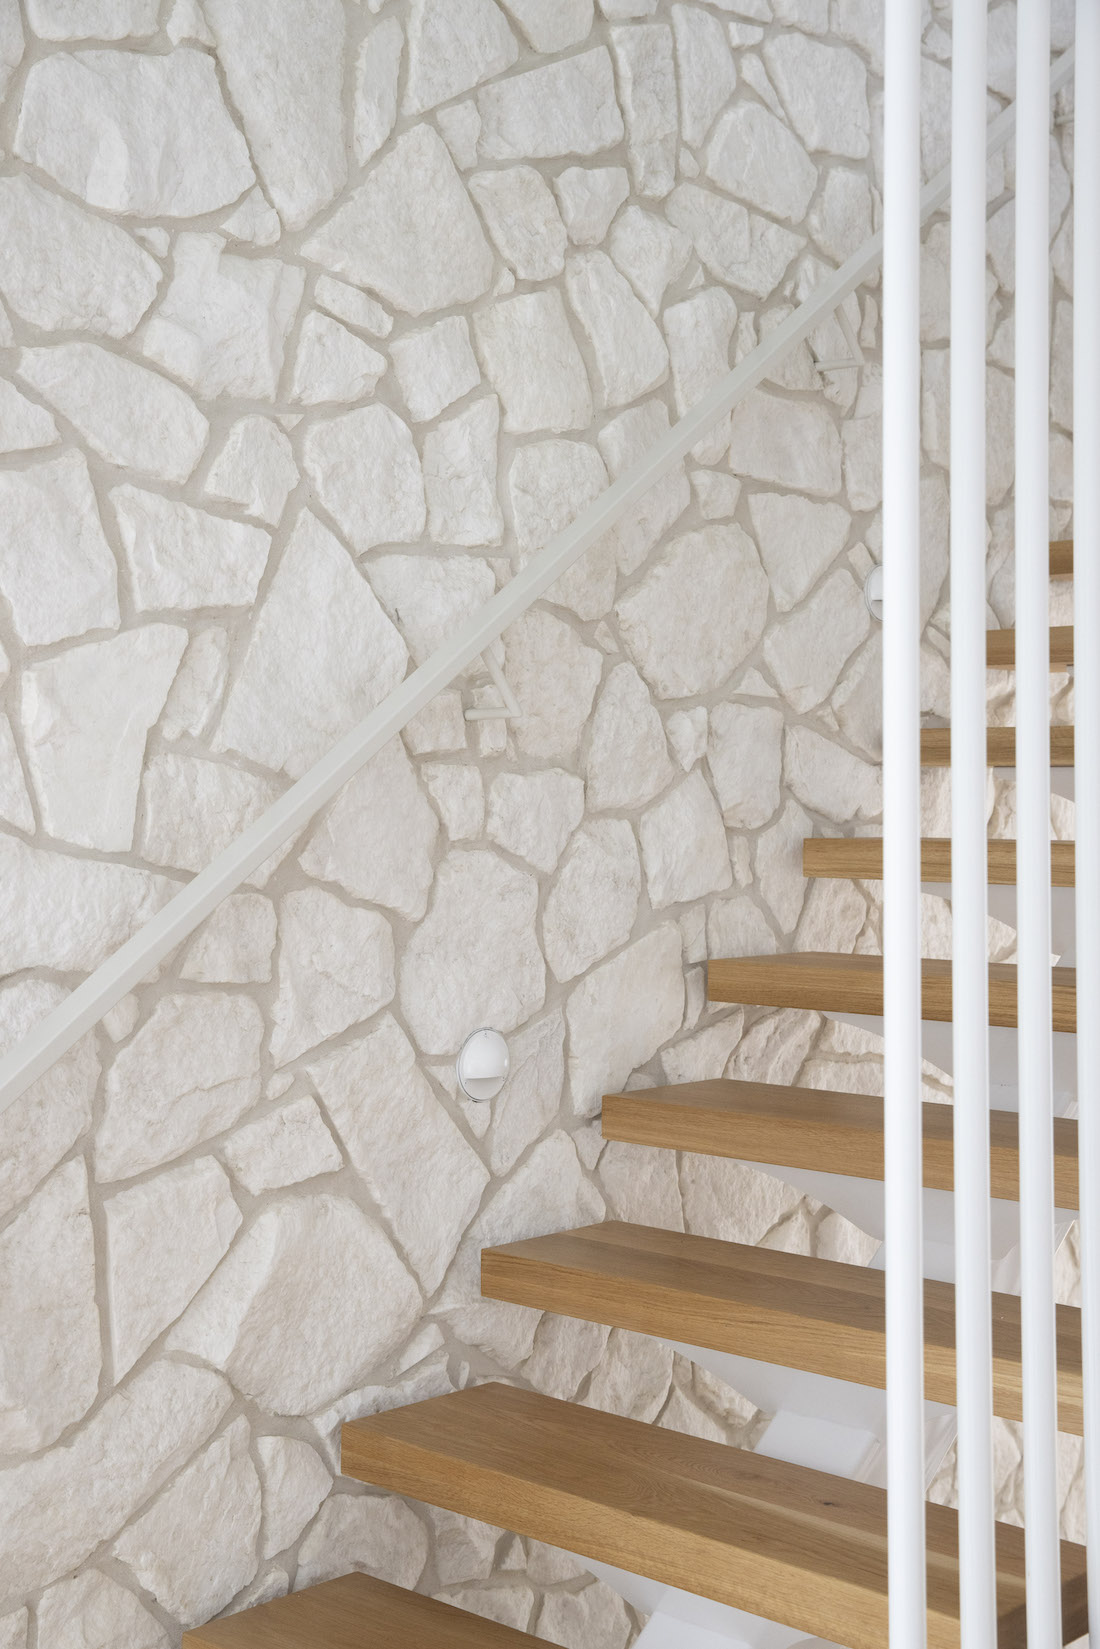 Staircase crazy pave stone feature wall at Tawarri house